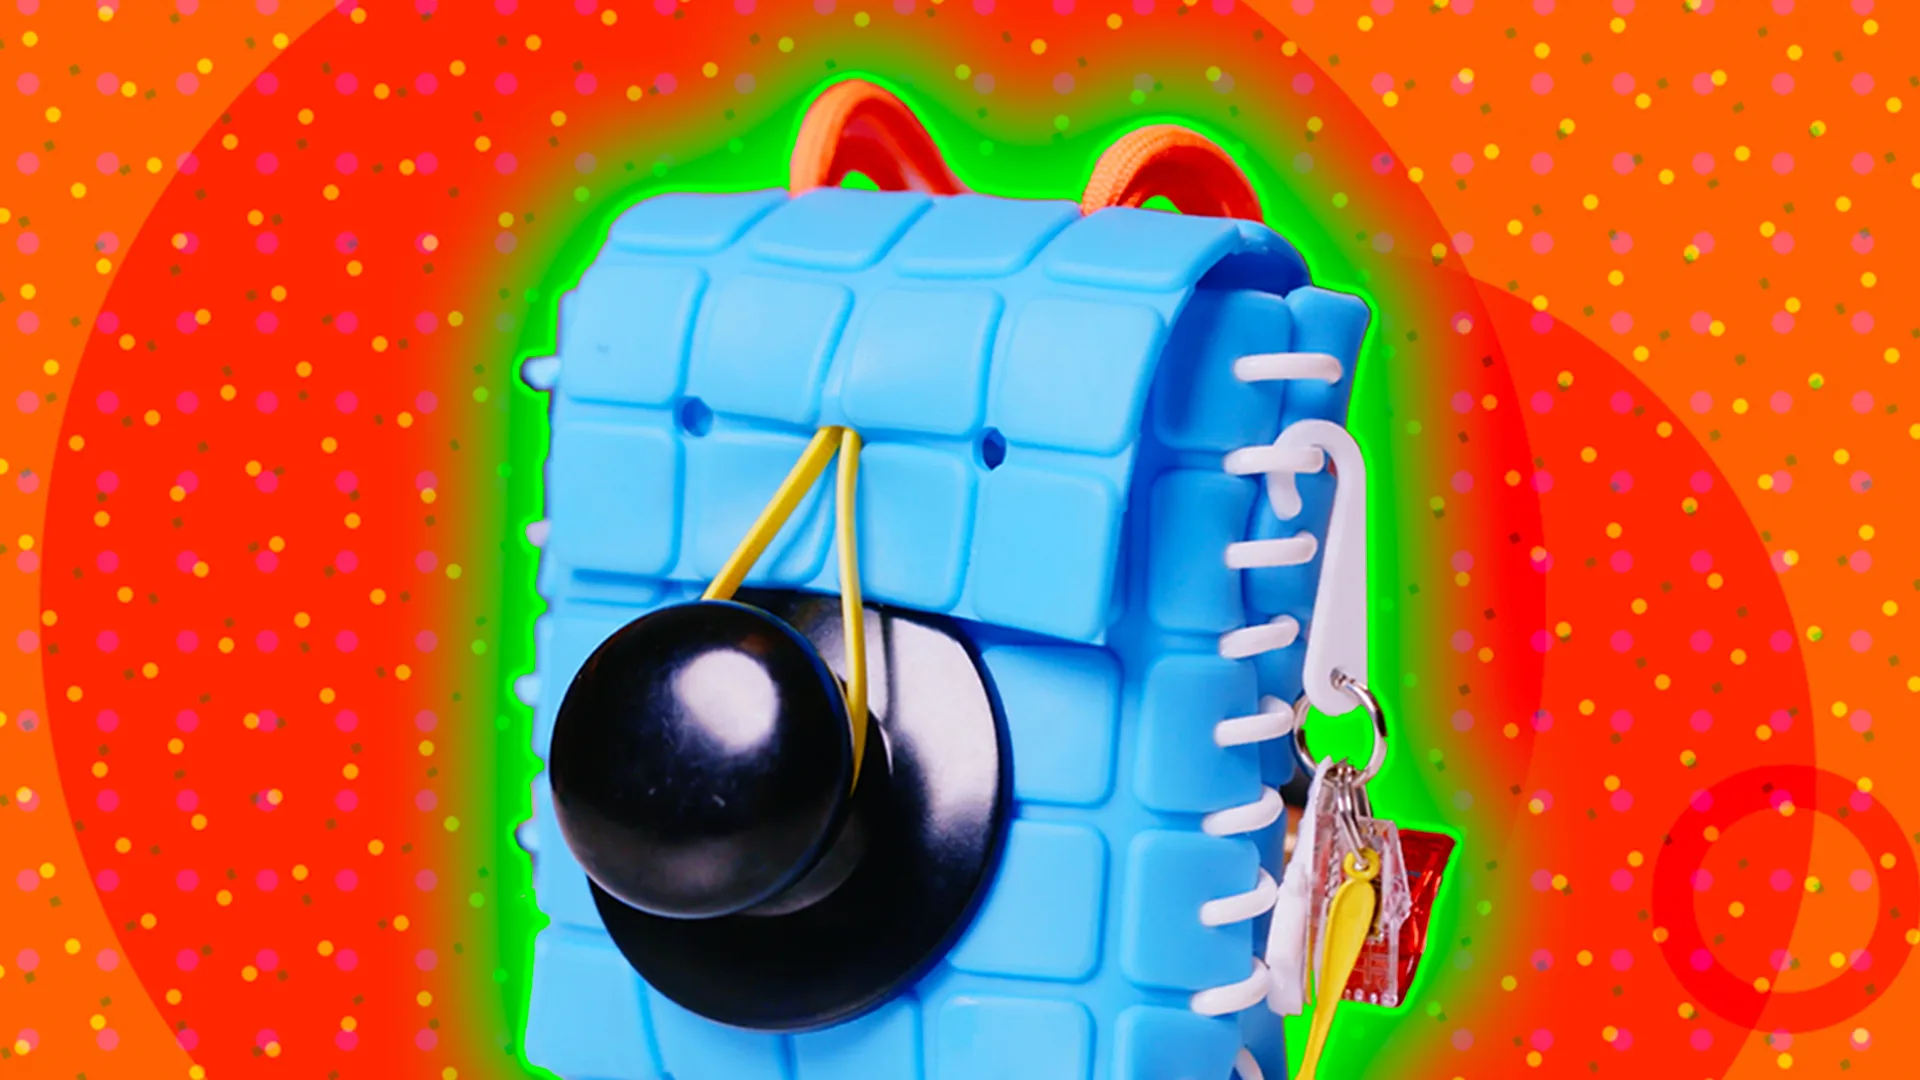 A blue handbag with a black doorknob on the front against an orange background